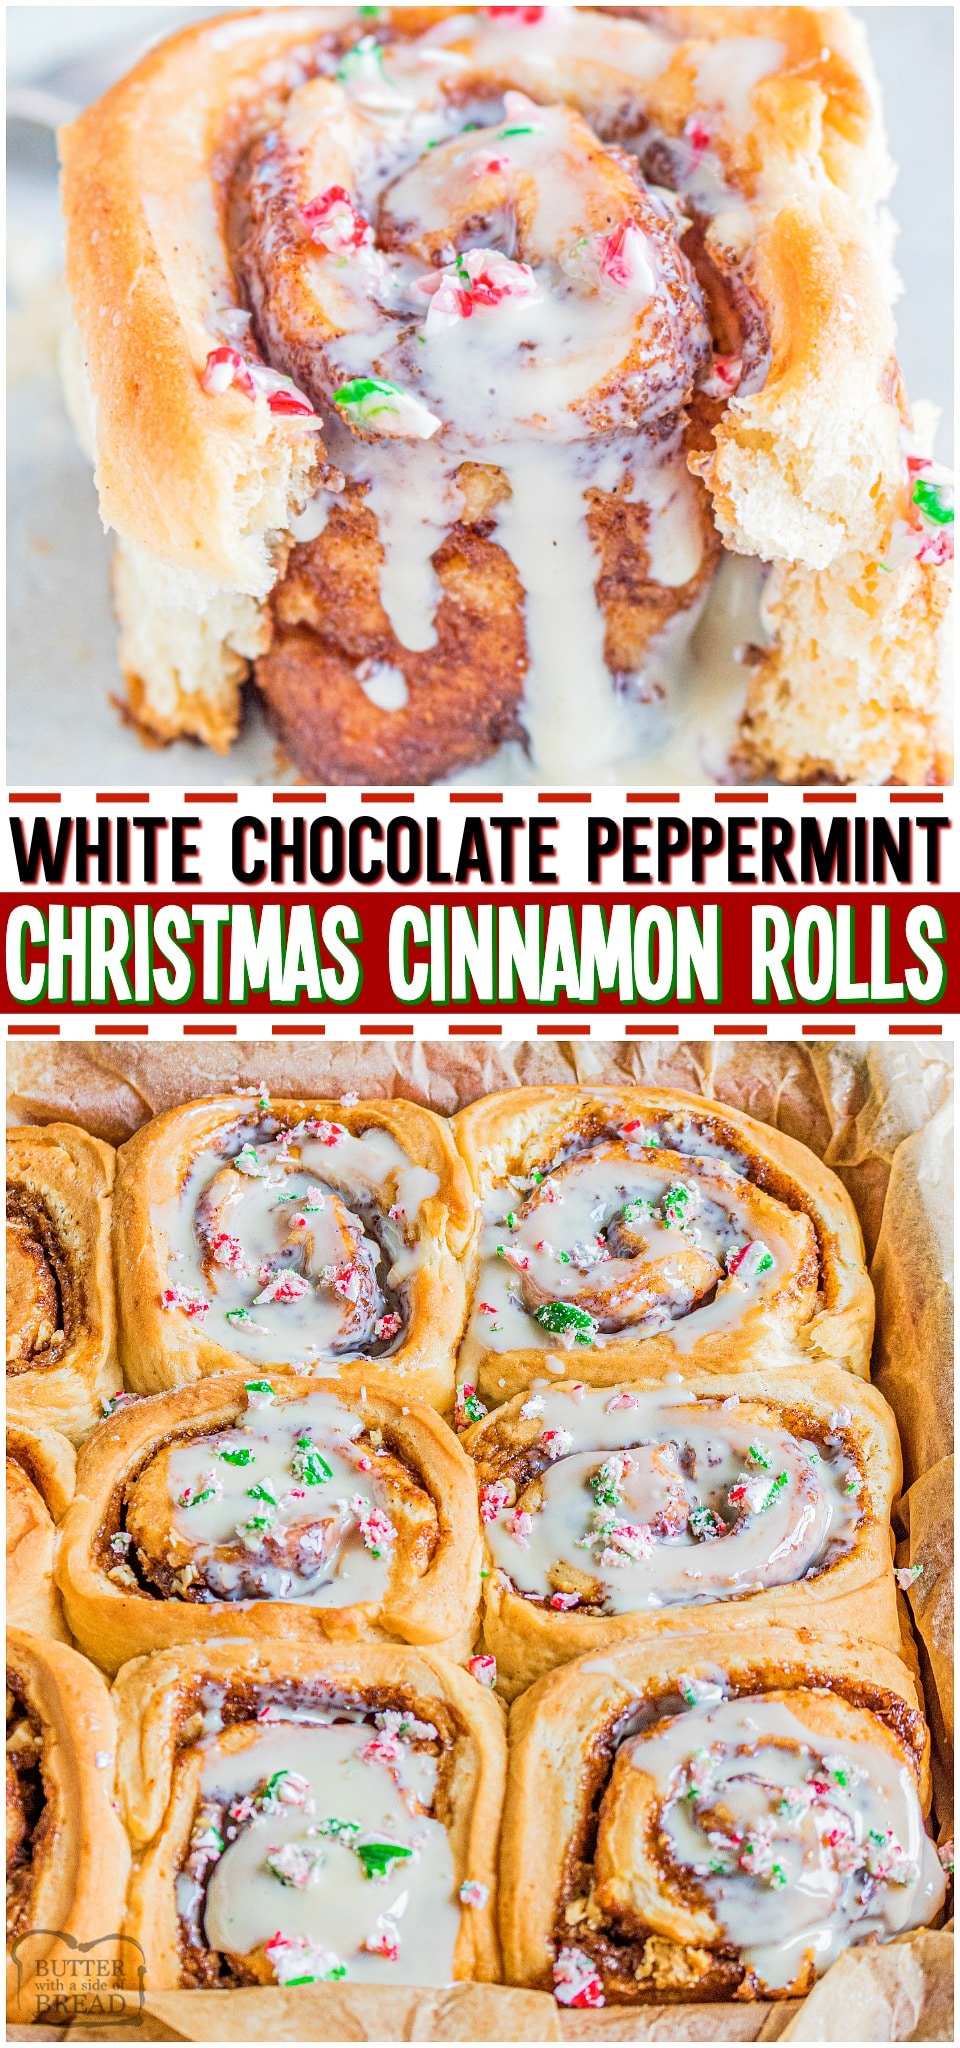 Christmas Cinnamon Rolls made with a cinnamon, white chocolate filling and topped with a simple peppermint vanilla glaze! Celebrate Christmas morning with this festive homemade Cinnamon Roll recipe! 